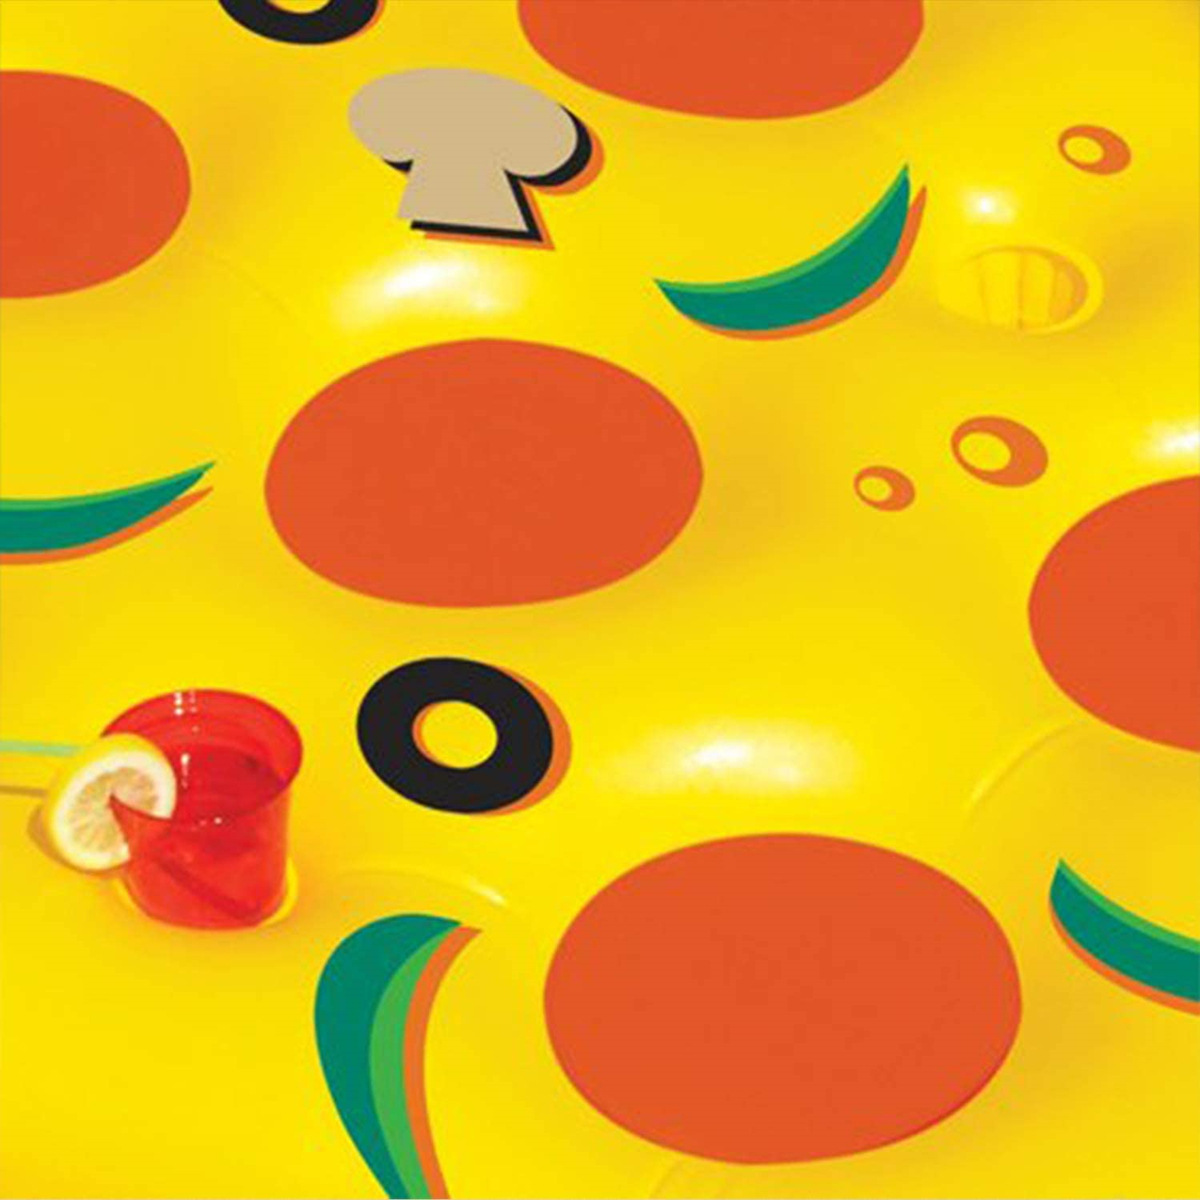 Multicolor Pizza Slice Swimming Pool Float Inflatable Water Raft with Cup Holders